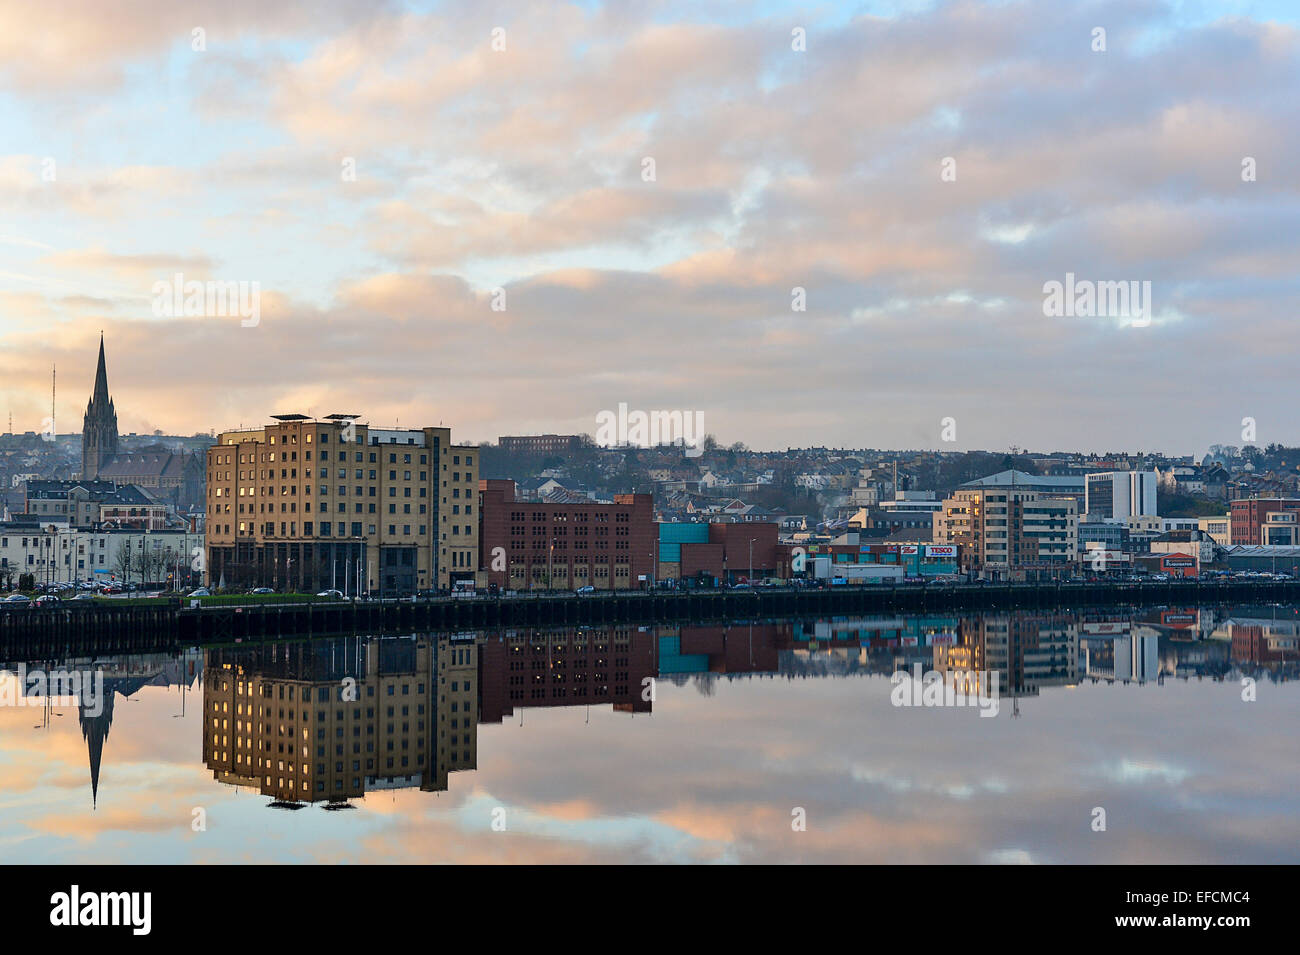 Waterfront buildings reflection on River Foyle, Londonderry (Derry) Northern Ireland Stock Photo